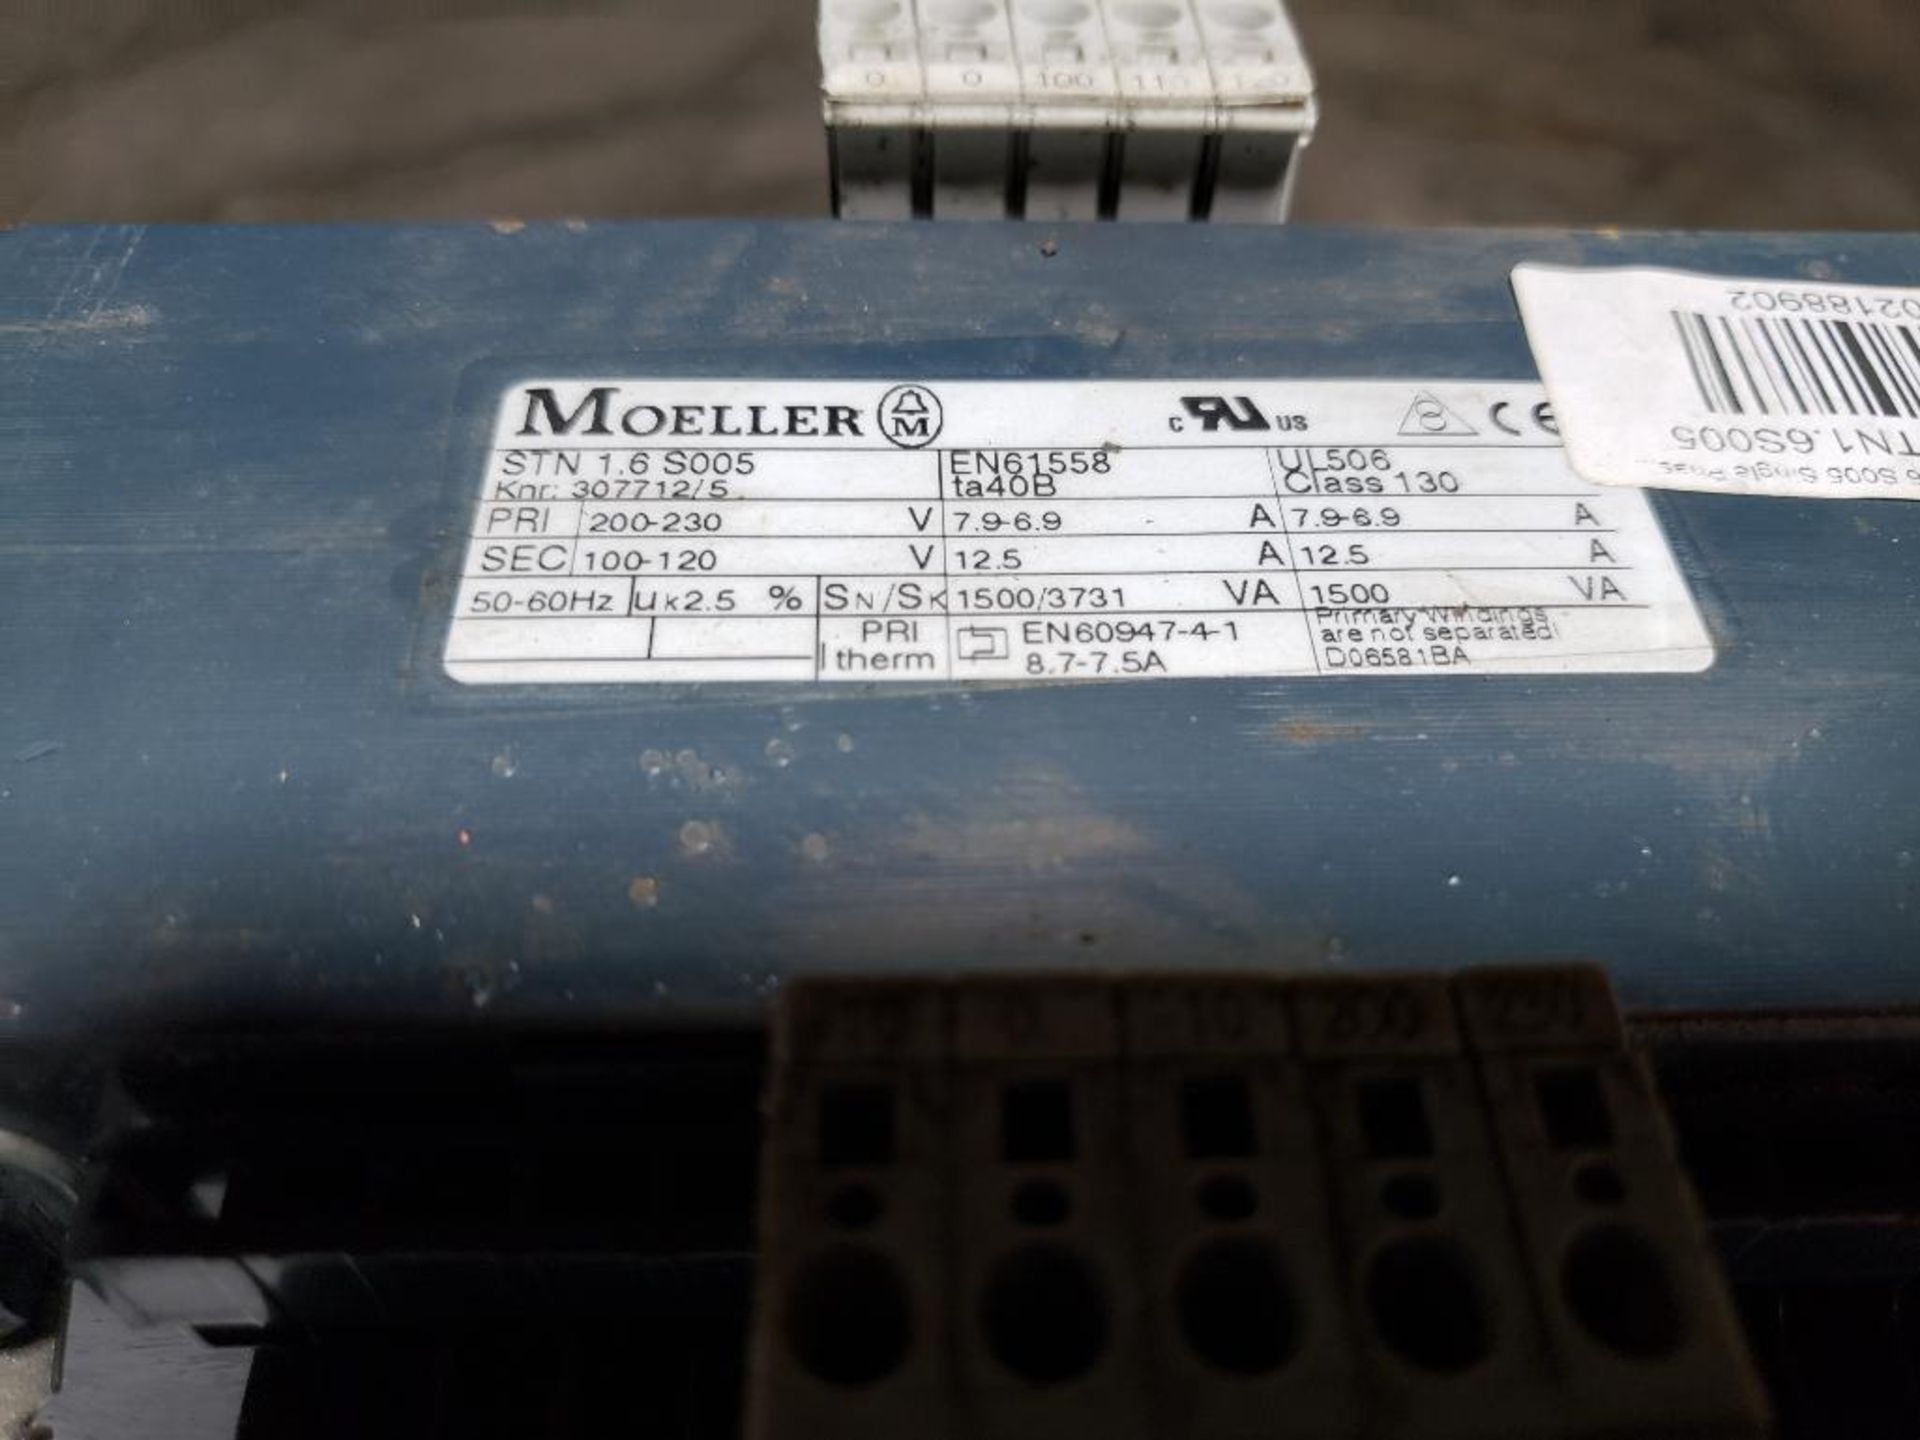 Qty 3 - Moeller STN 1.6 S005 single phase control transformer. - Image 2 of 3